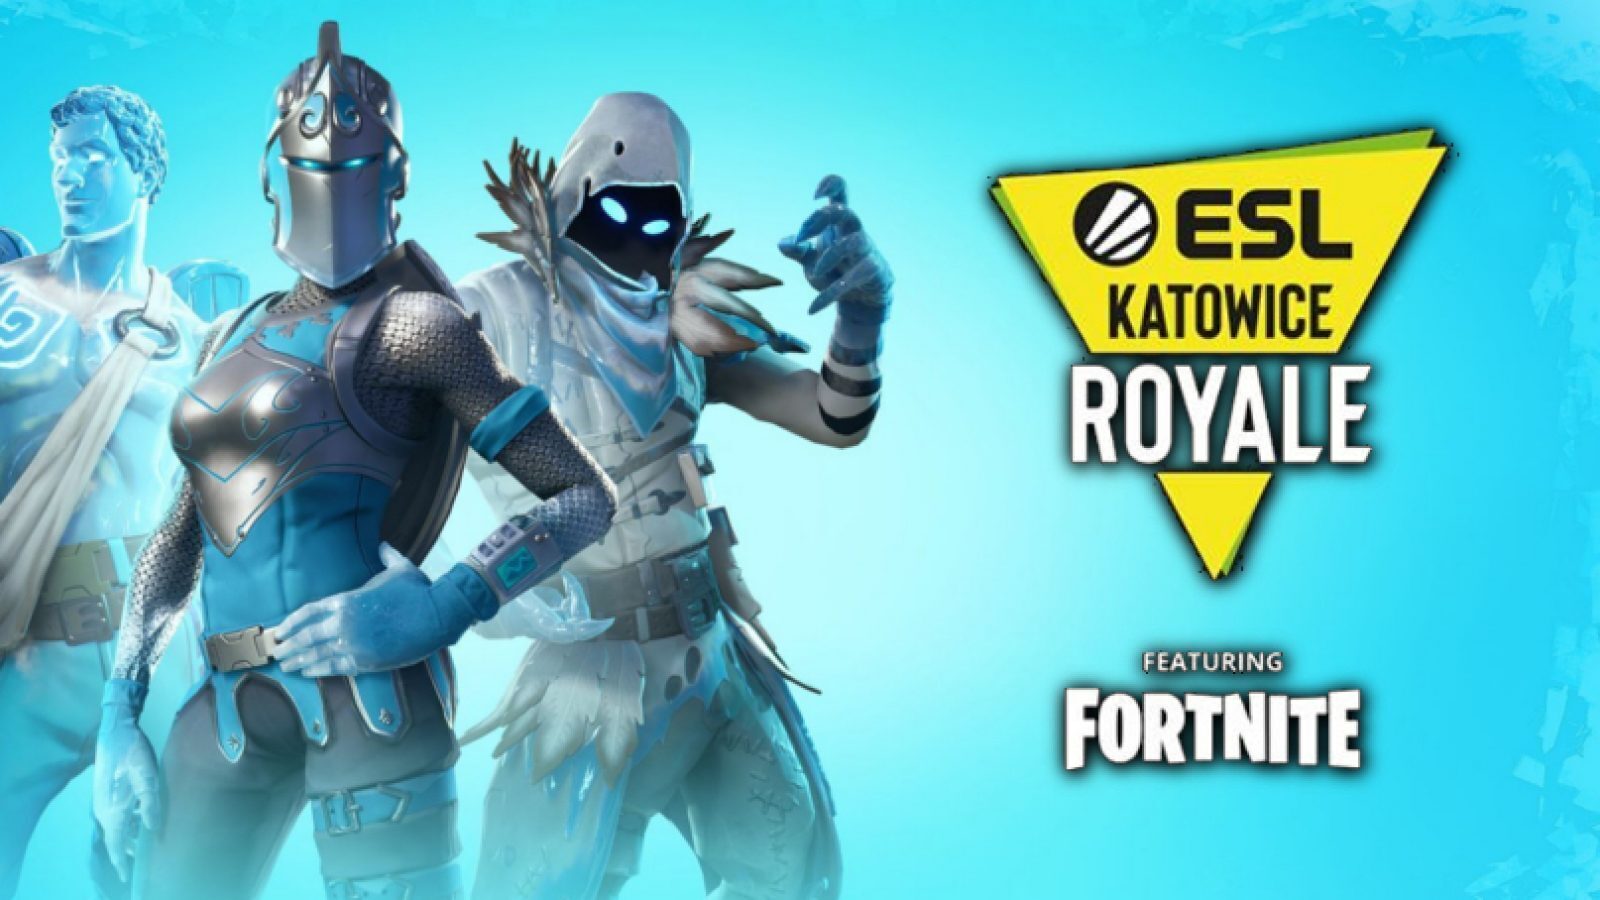 Rocco “Saf” Morales and Williams “Zayt” Aubin have been crowned the winners of the $400,000 duo tournament at ESL Katowice Royale.